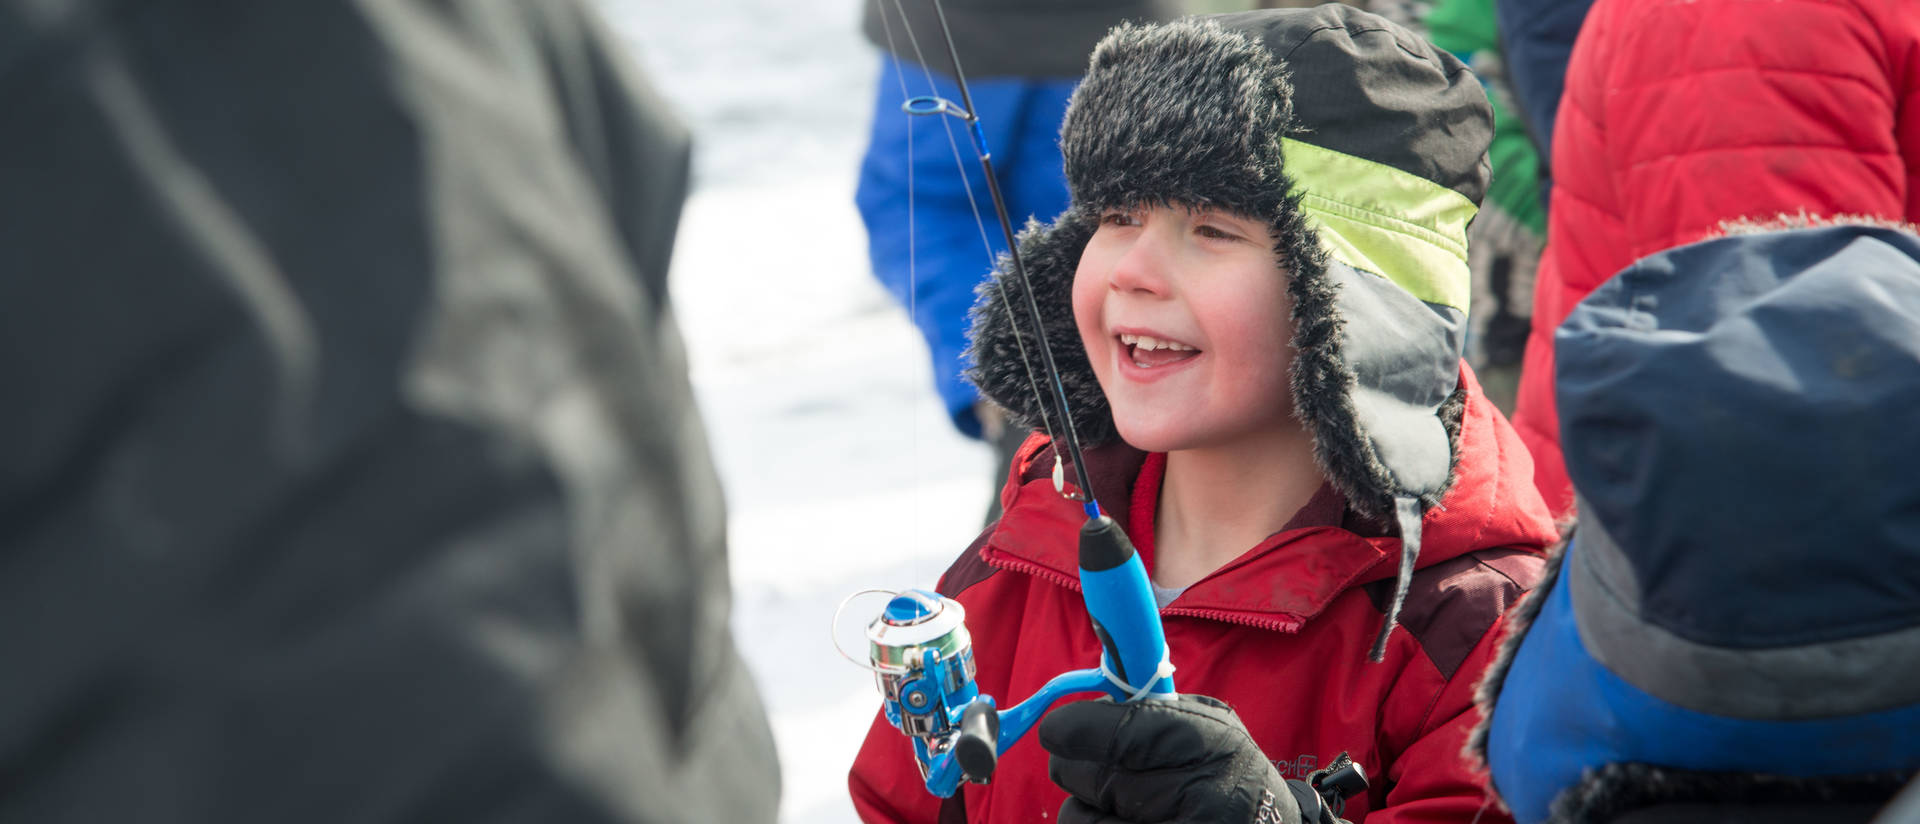 Youth participant in the 2019 Jig's Up Blugold Ice Fishing Contest